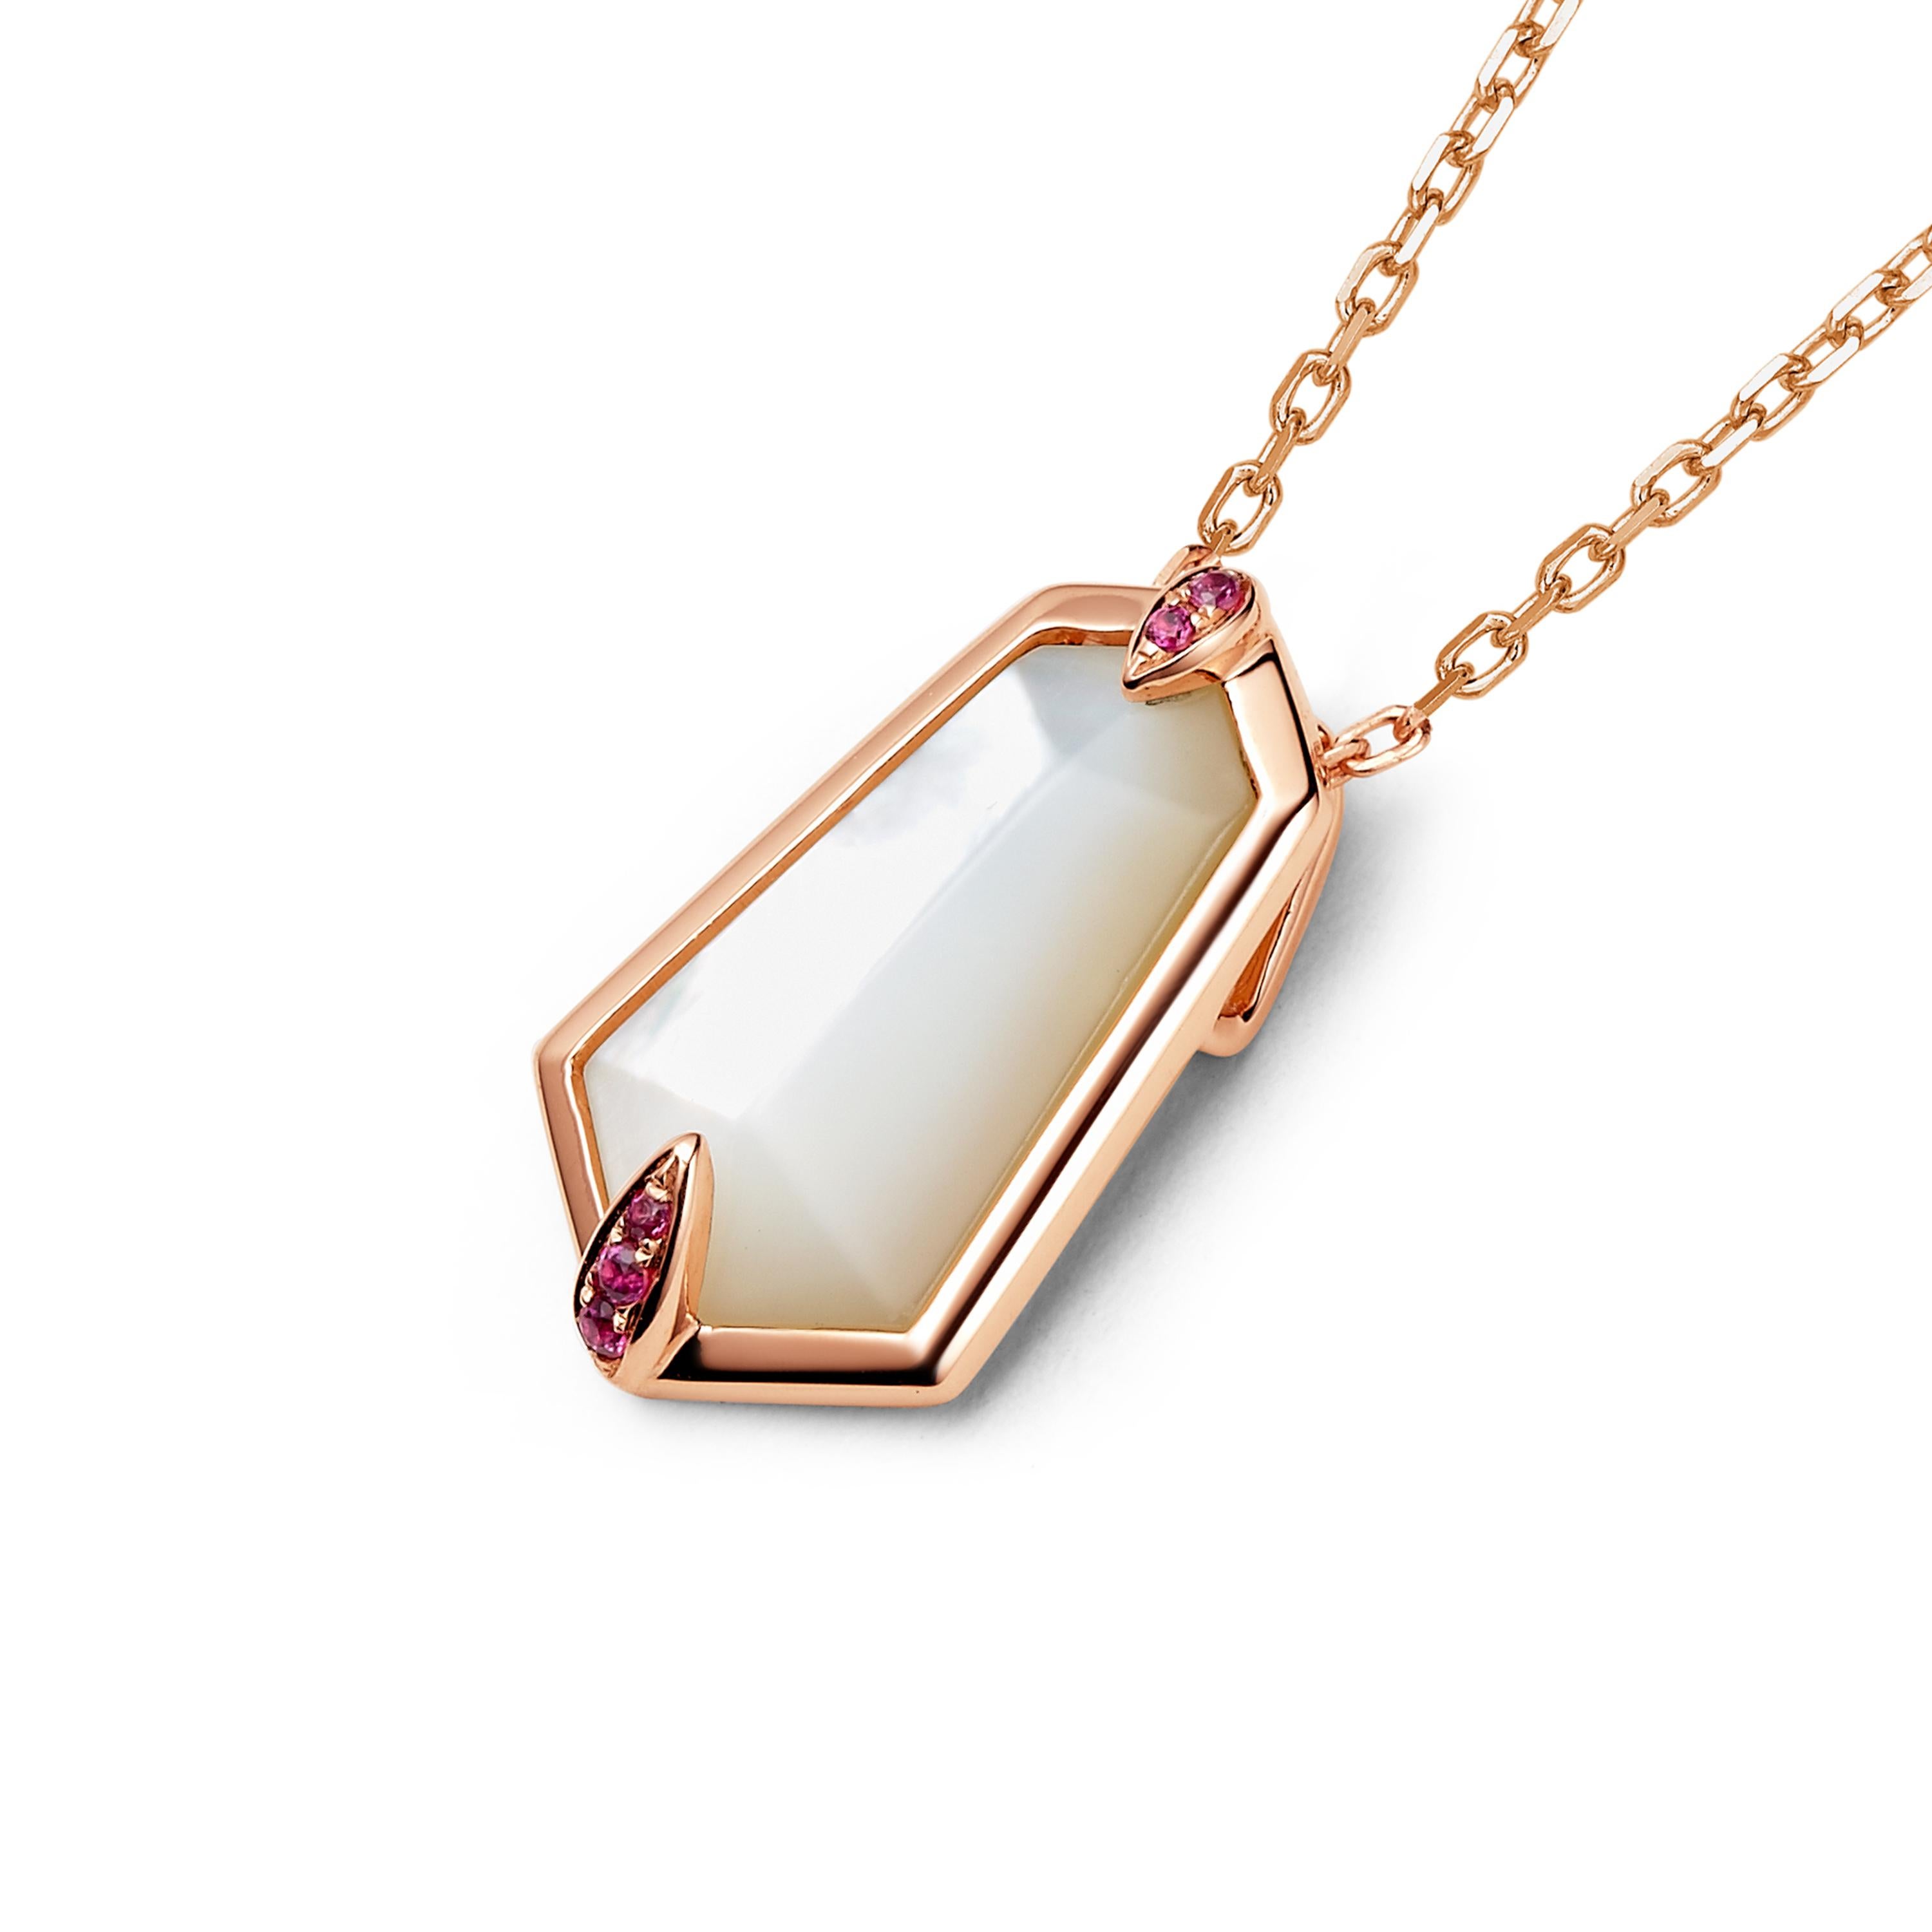 Let's go fly a kite. Sometimes it just the joy of seeing the kite take flight and sail freely through the air. They're lightness and form are embodied within the Nova Collection. The Nova large kite pendant feature delicately hand-cut 1.6ct mother